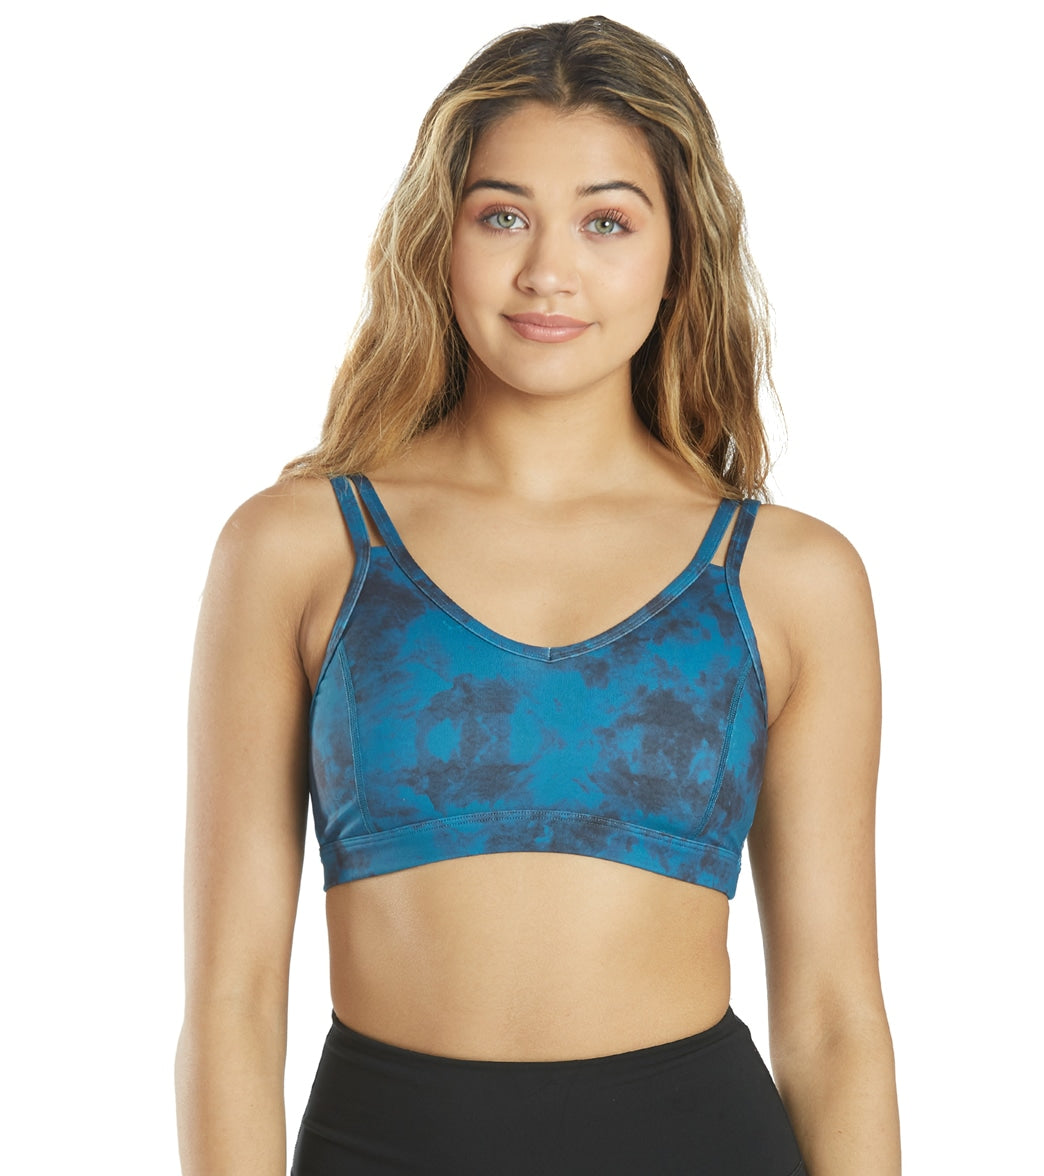 Everyday Yoga Radiant Tribe Strappy Back Sports Bra at YogaOutlet